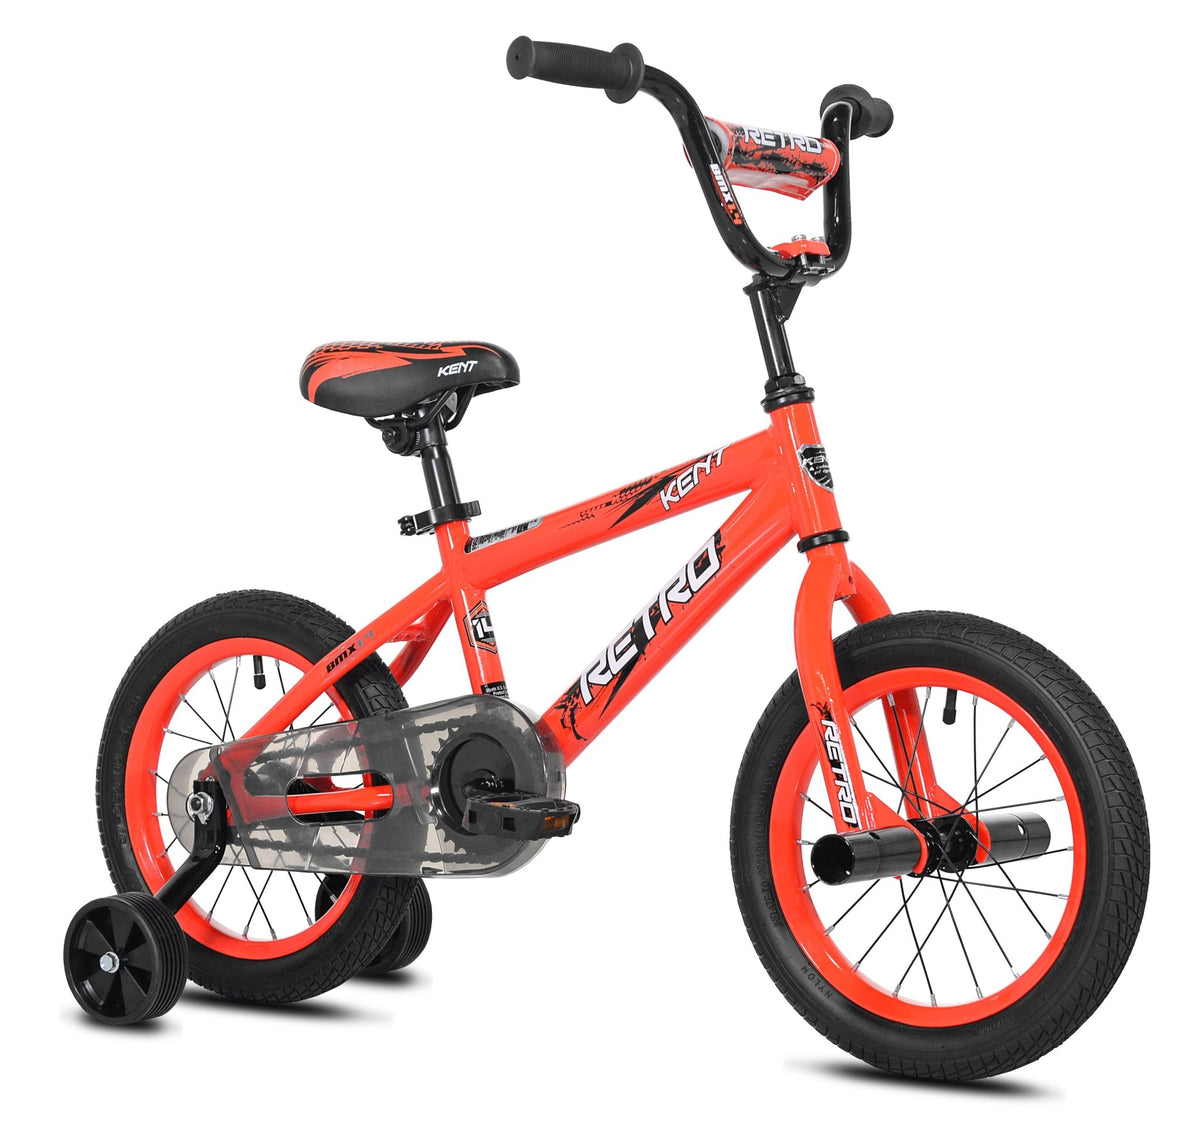 14" Kent Retro | Bike for Kids Ages 3-5